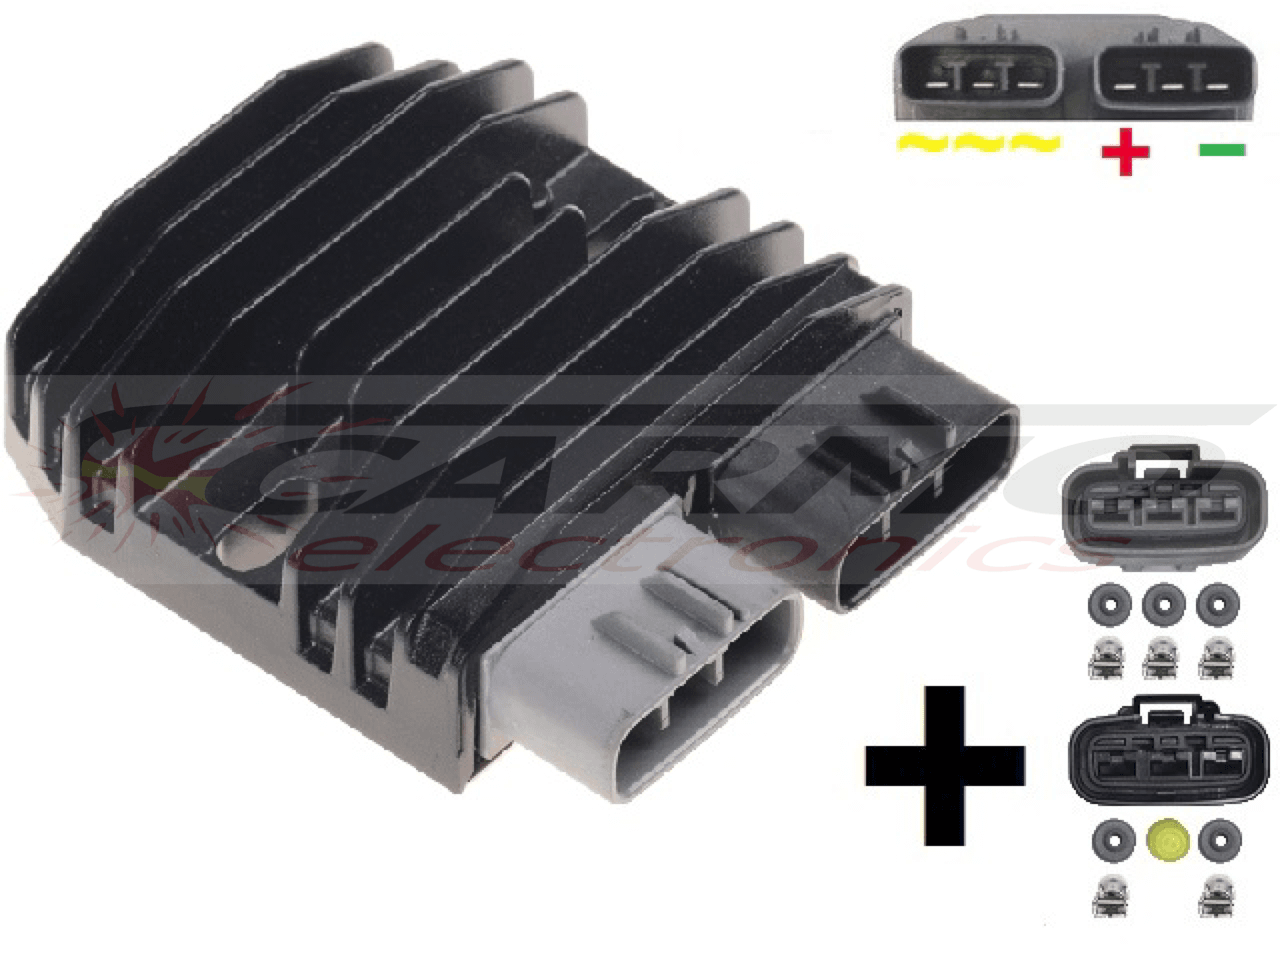 CARR5925 + contra Triumph Yamaha MOSFET Voltage regulator rectifier (improved SH847) T1300675, T1300022, T1300470, T1300470 - Click Image to Close